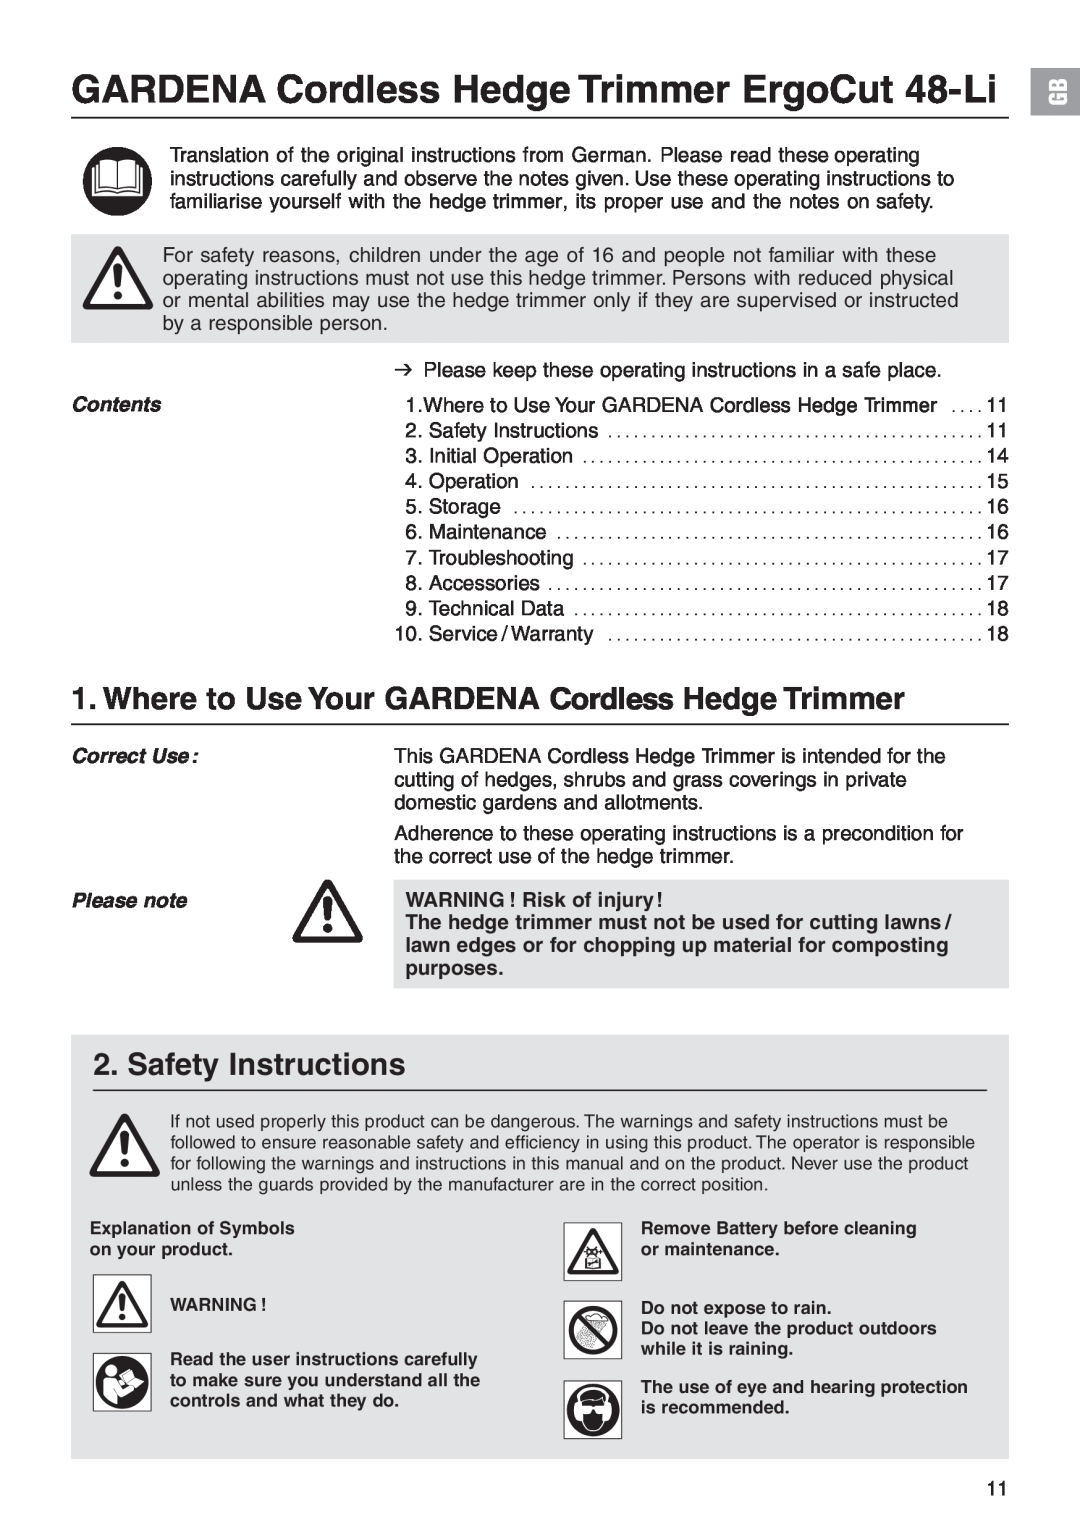 Gardena 48-Li Art. 8878 manual Where to Use Your GARDENA Cordless Hedge Trimmer, Safety Instructions 